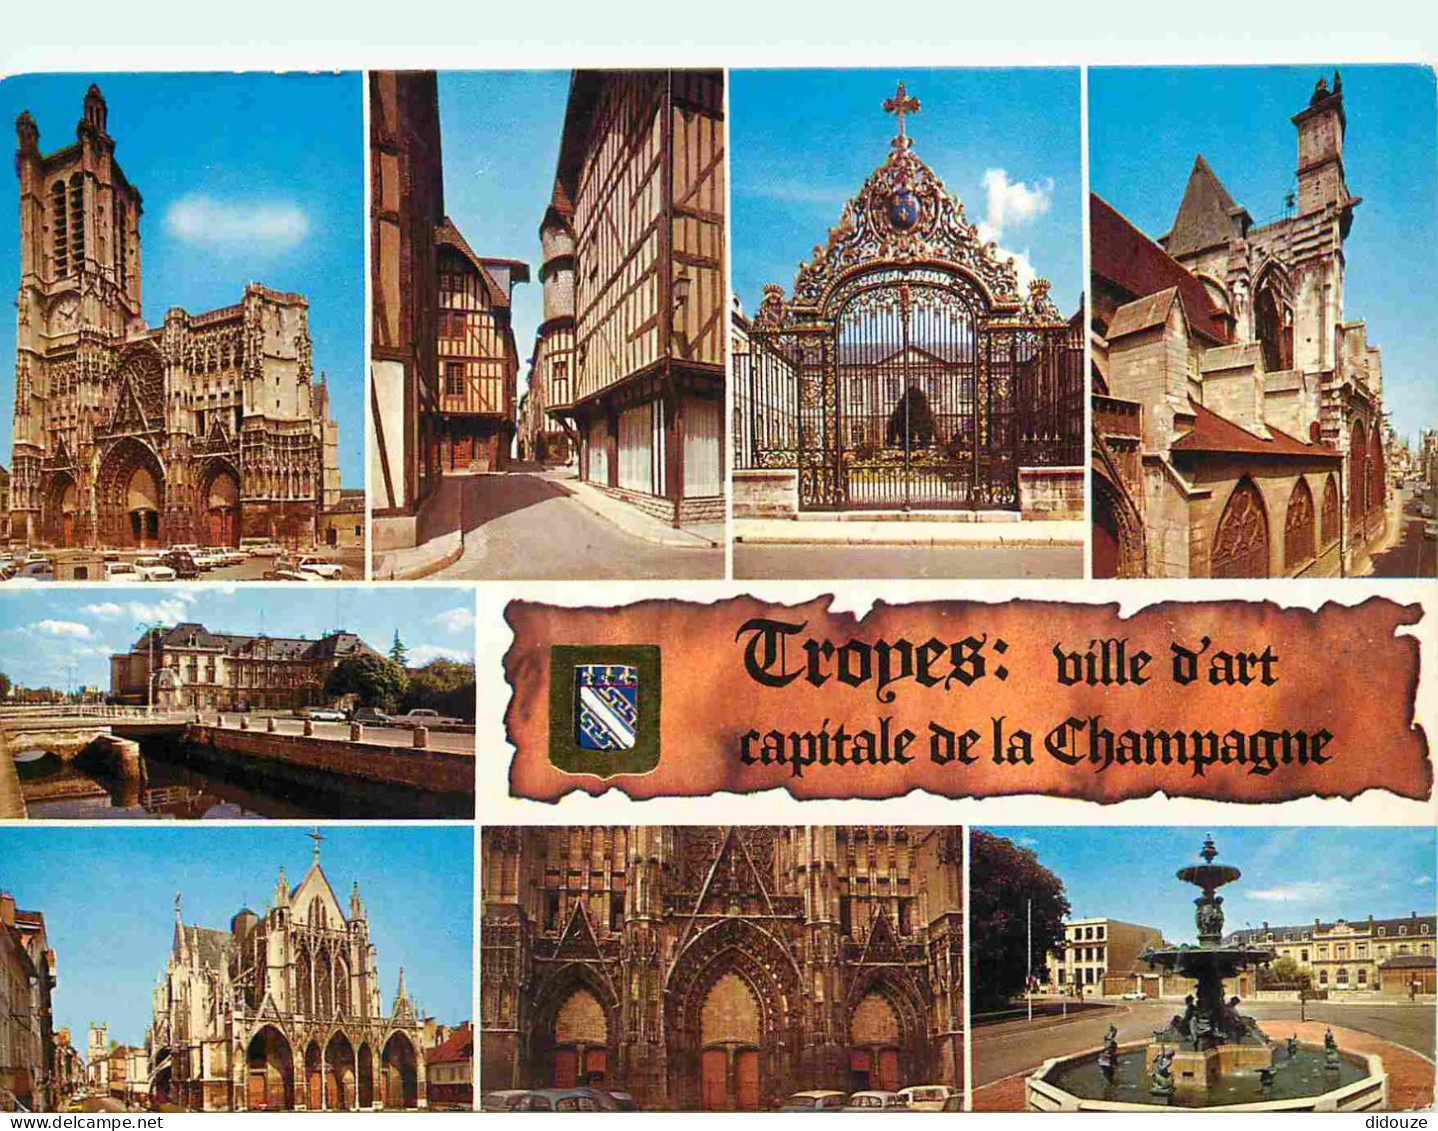 10 - Troyes - Multivues - Multivues - CPM - Voir Scans Recto-Verso - Troyes